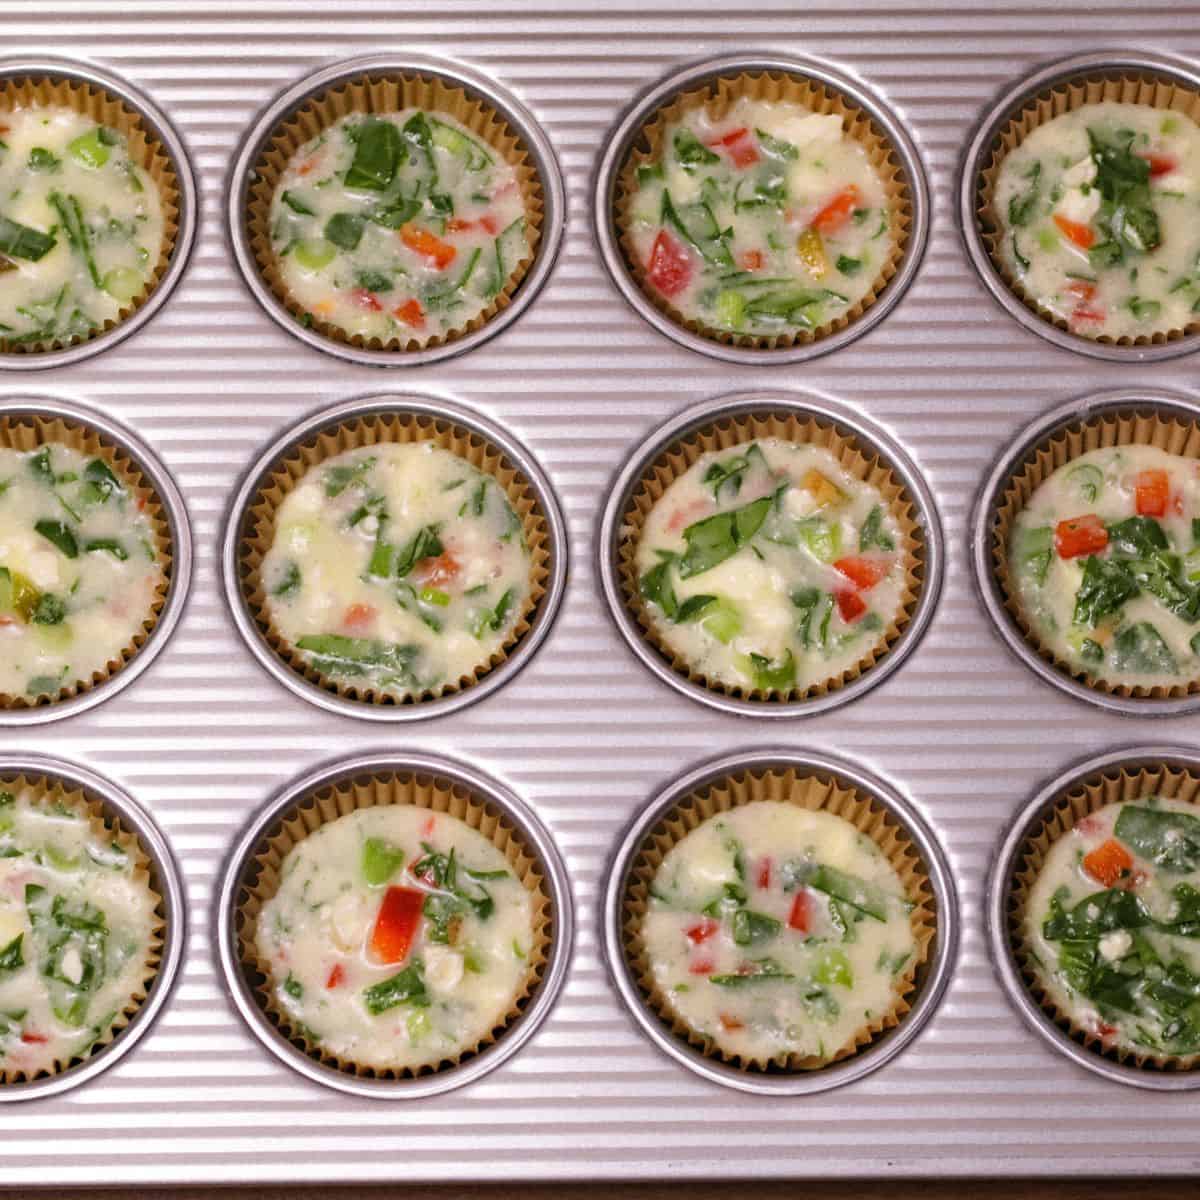 A muffin tin lined with paper liners filled with the raw egg white mixture, dotted with green and red from the spinach and bell peppers, ready to be baked.